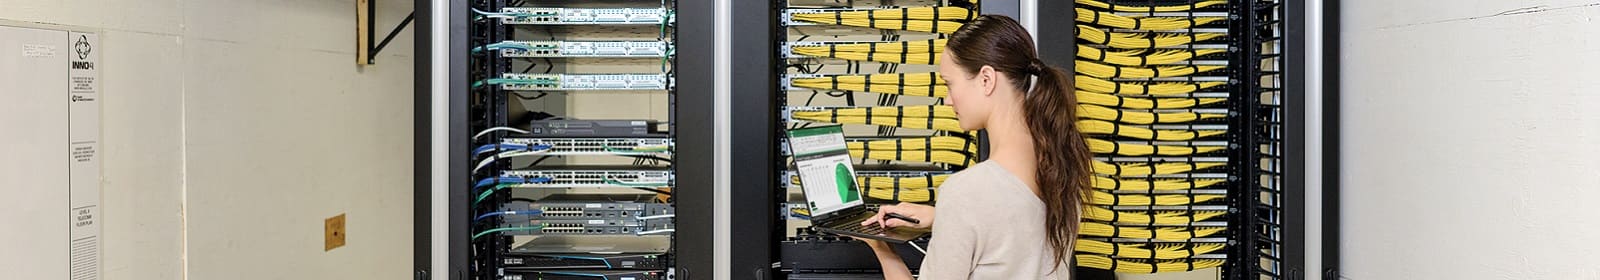 A female IT employee analyzes data in front of a server